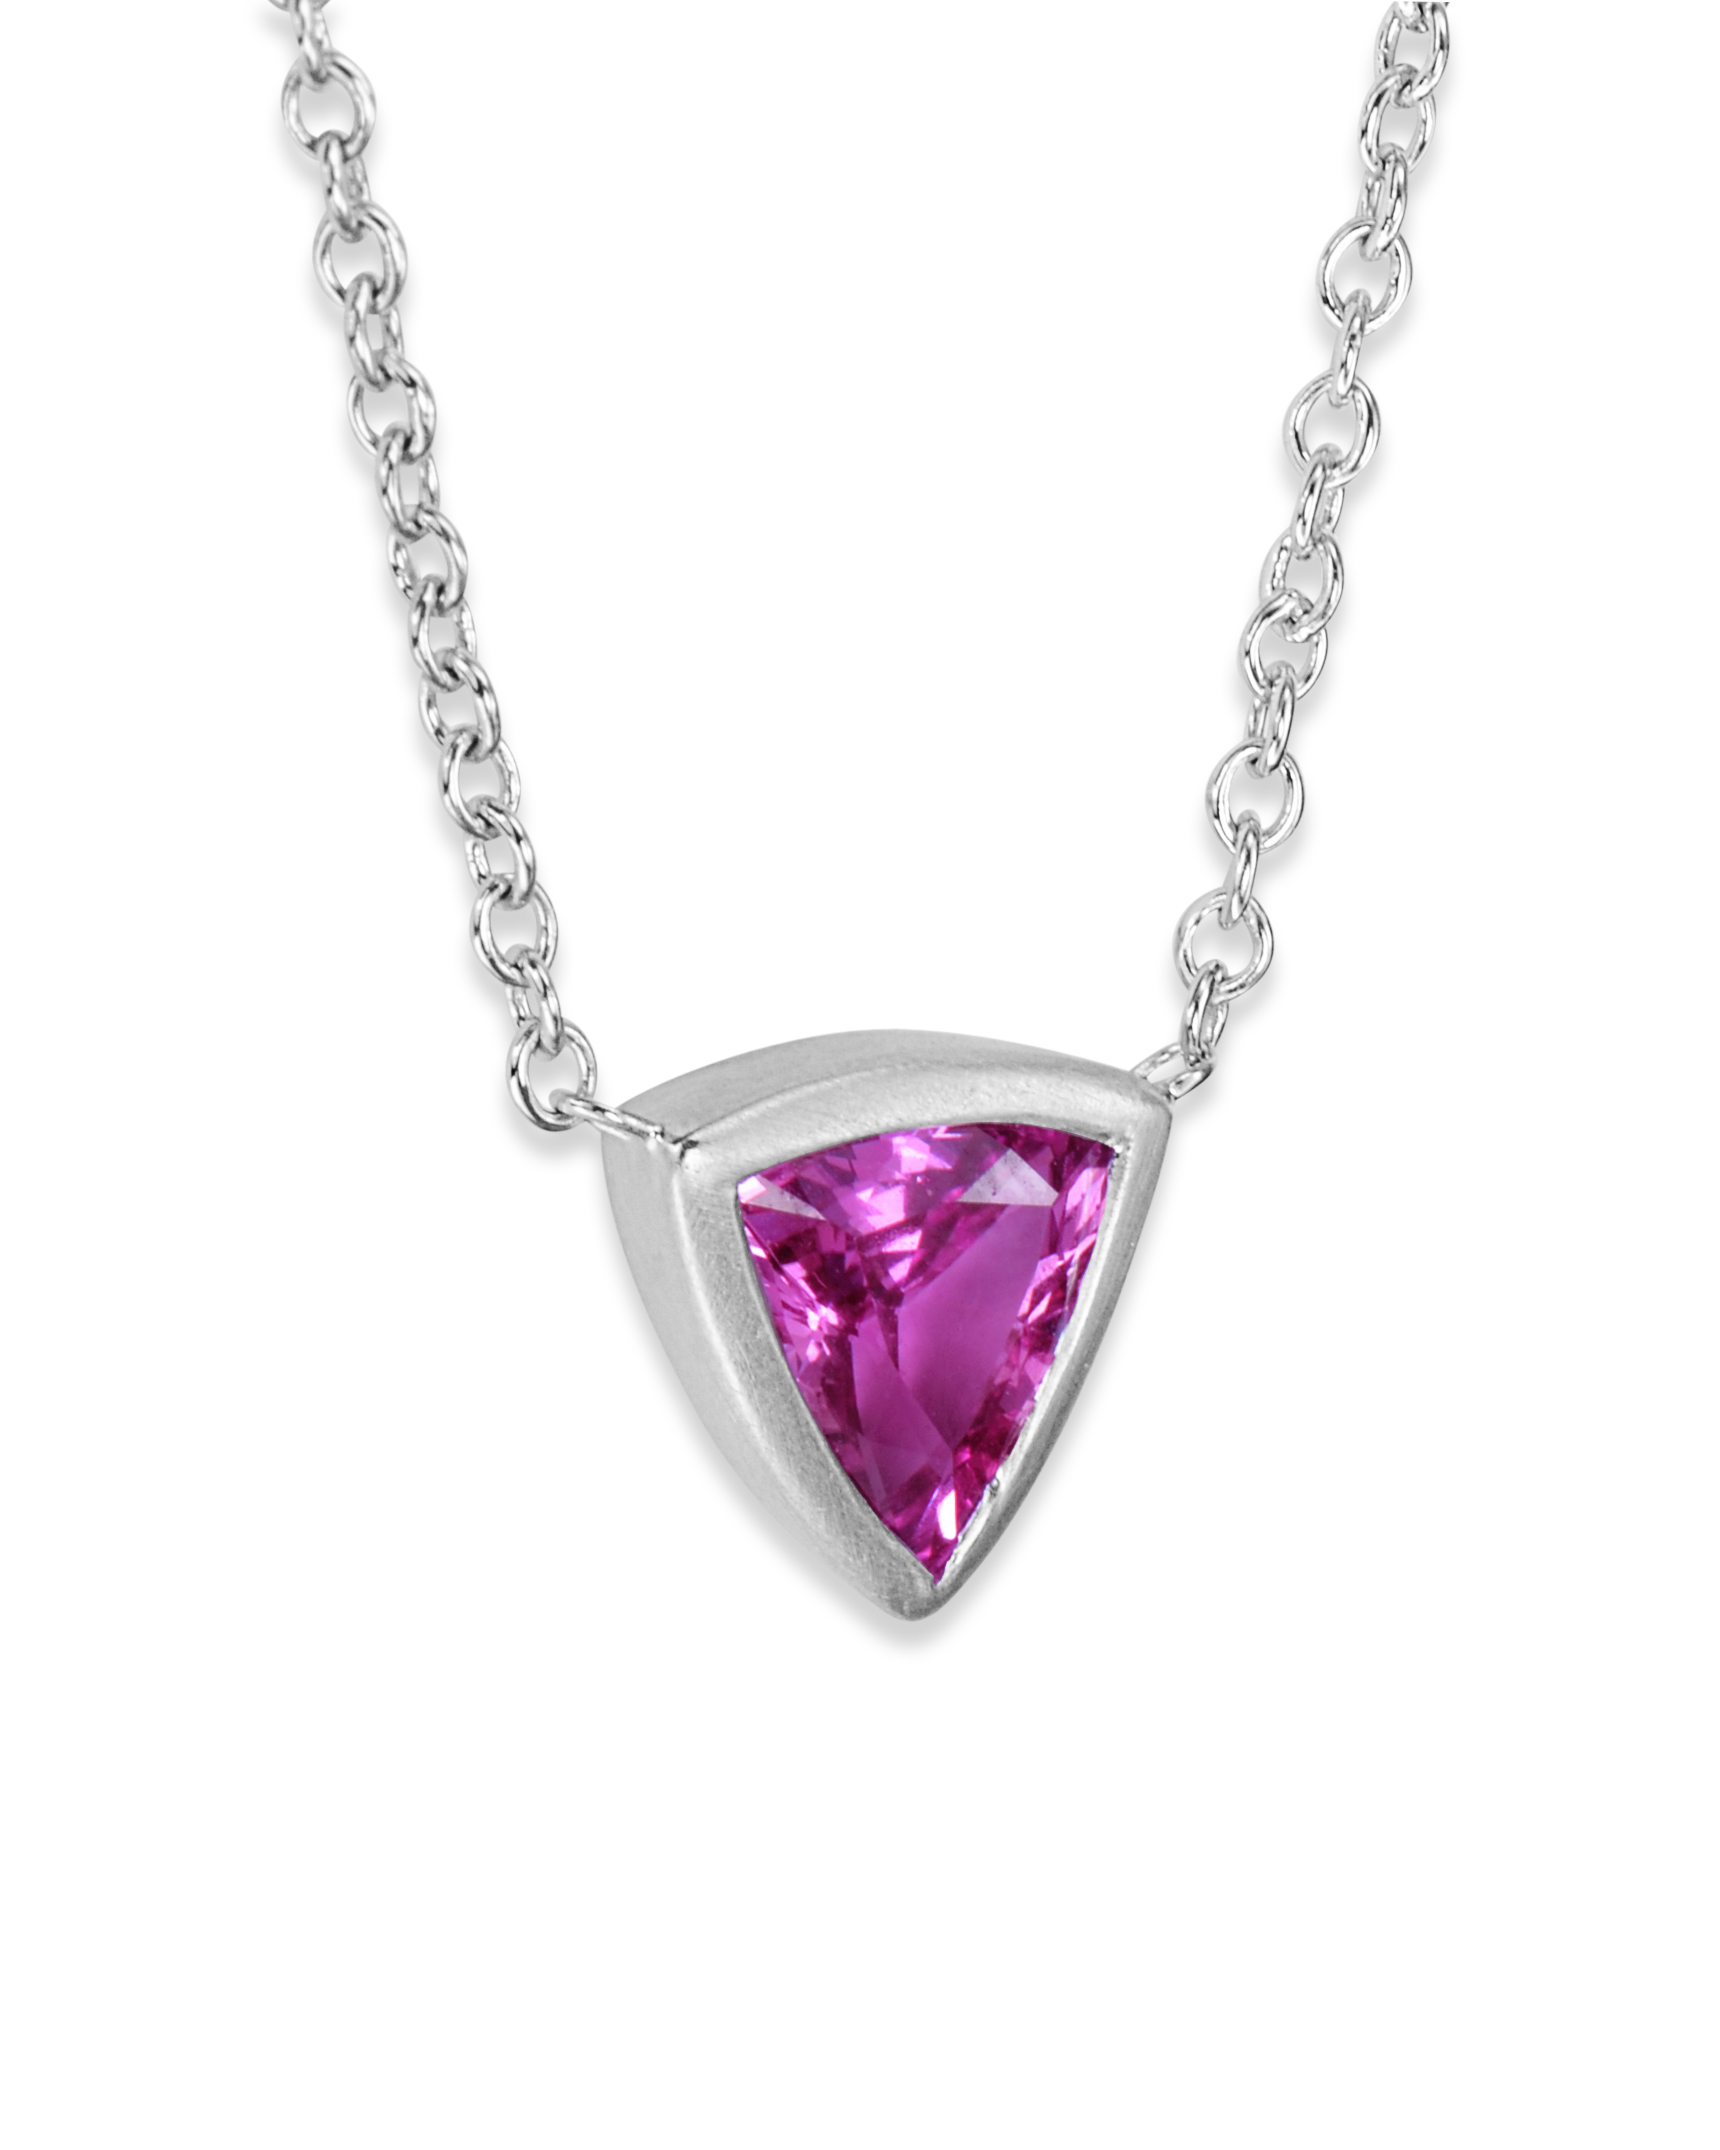 Louis Vuitton Pink Sapphire Necklace :: Keweenaw Bay Indian Community